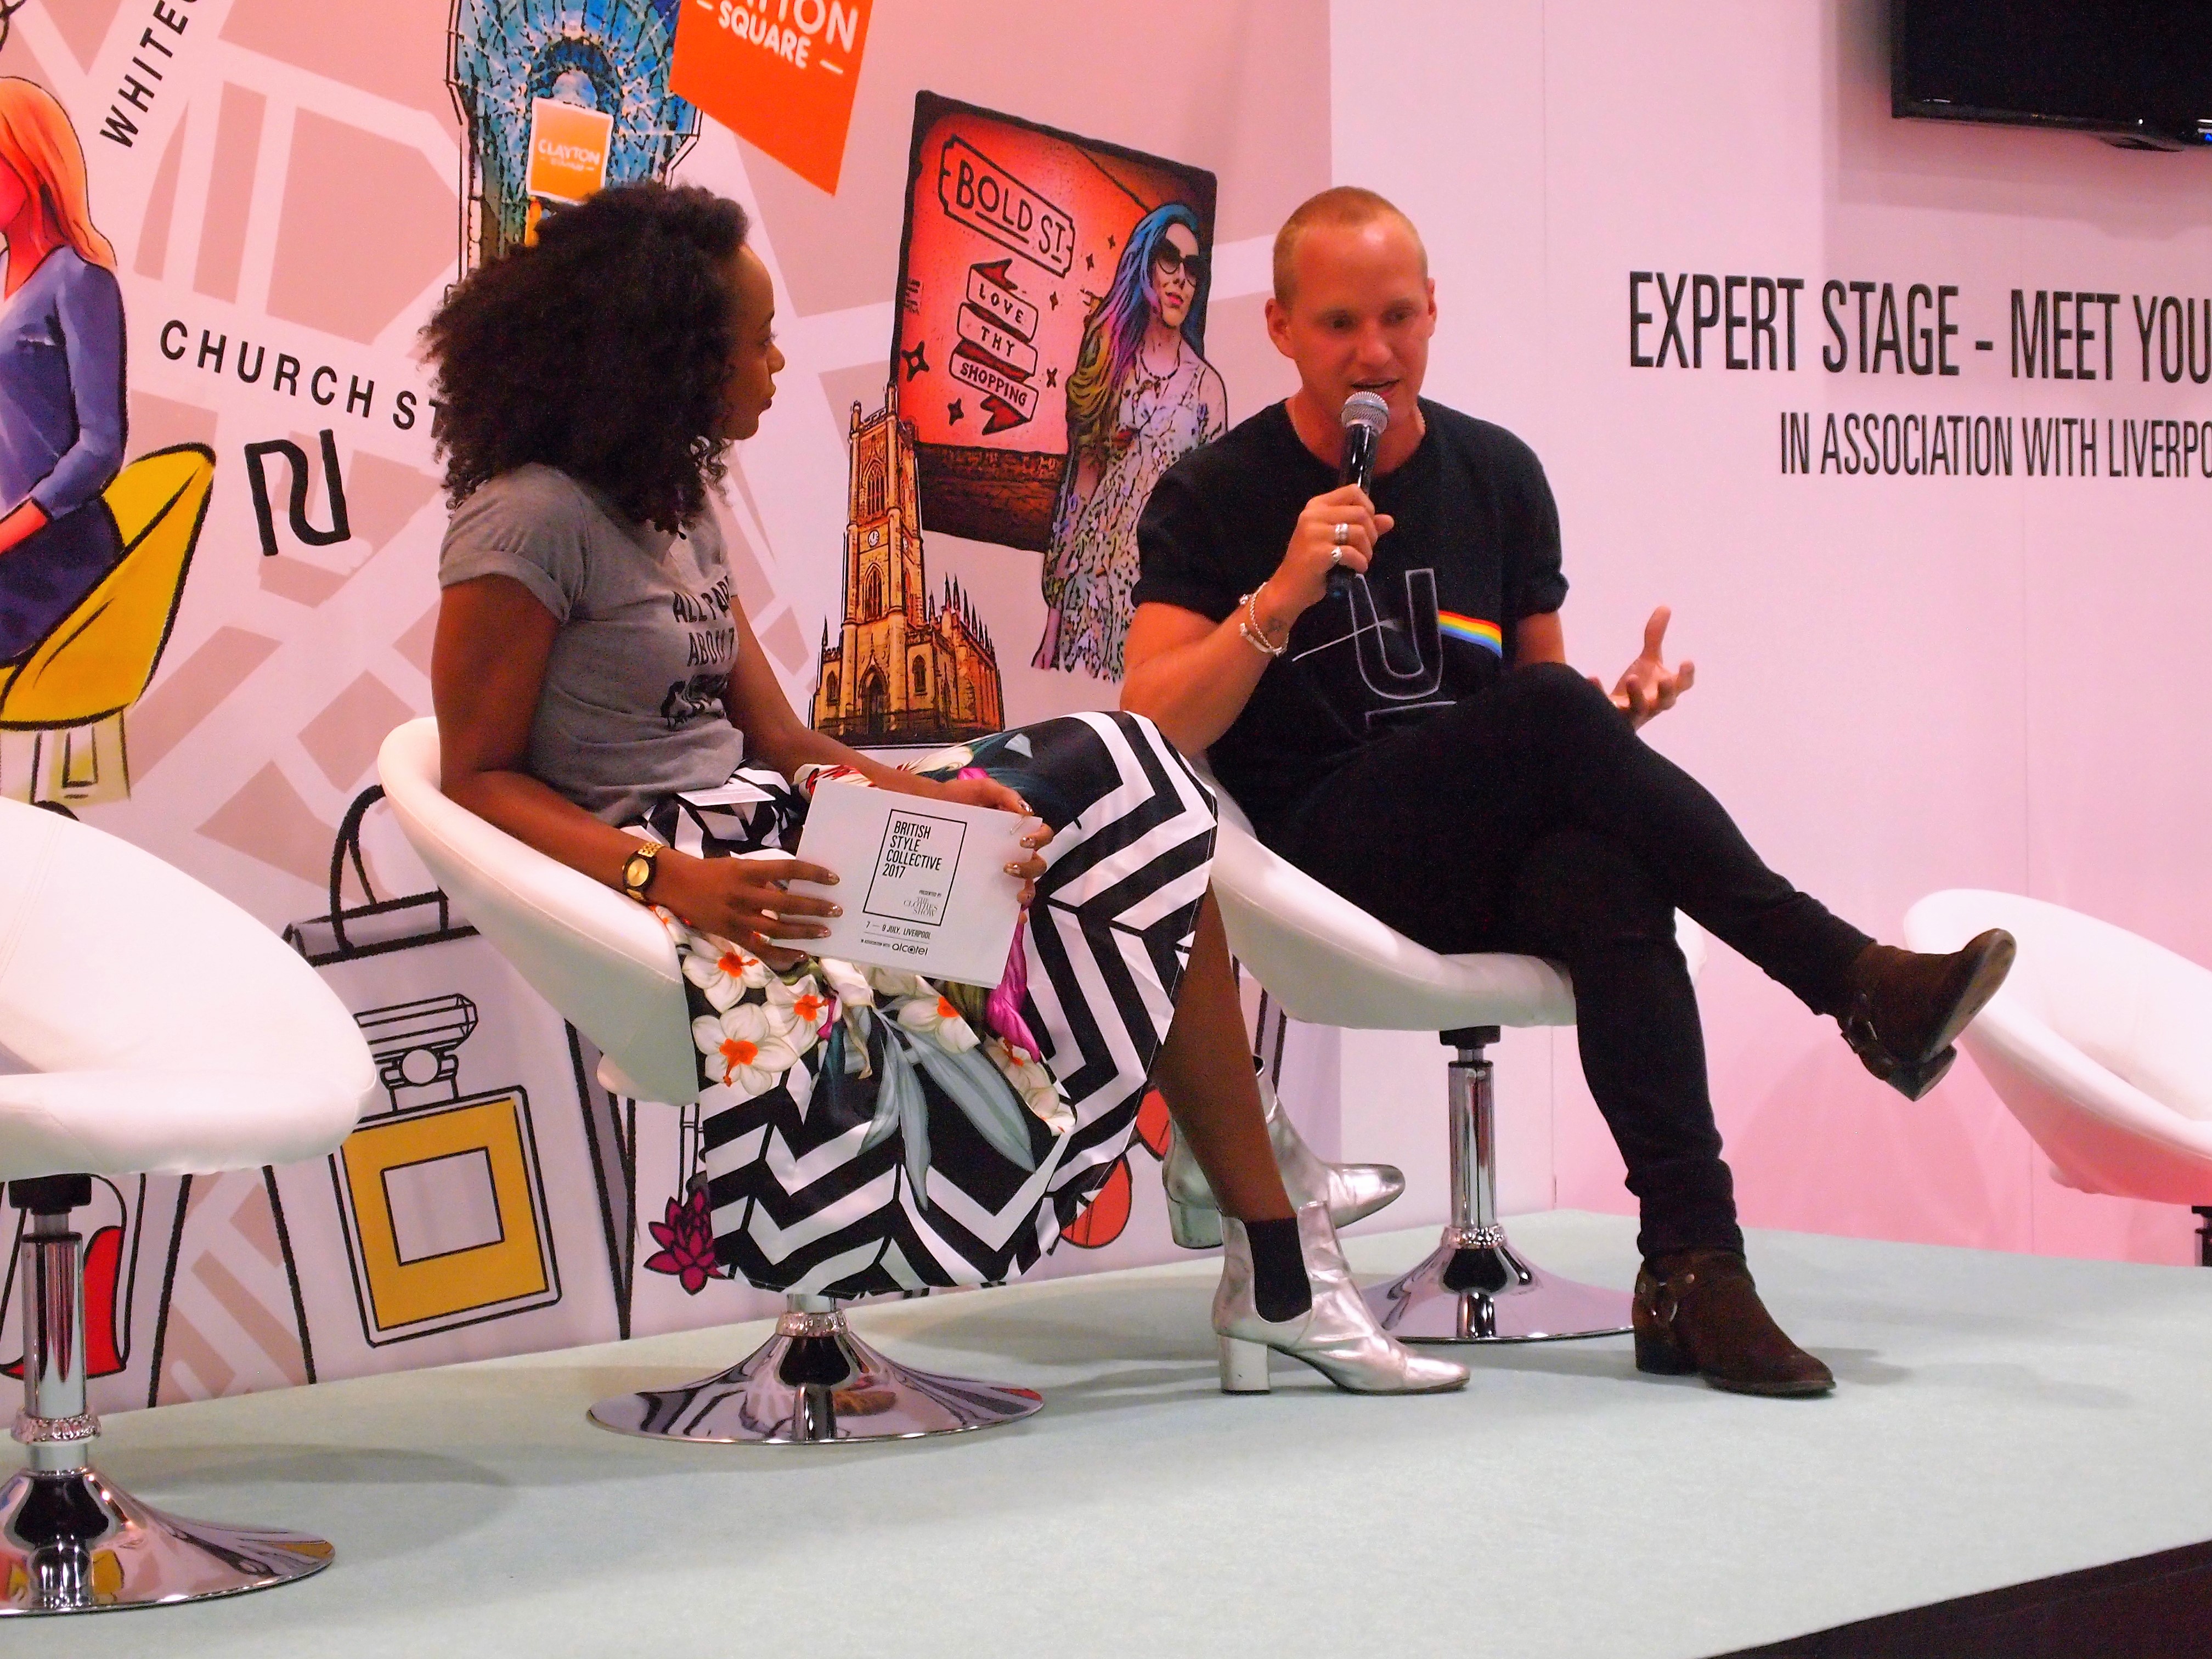 Jamie Laing talks about his brand 'Candy Kittens' on the Expert Stage